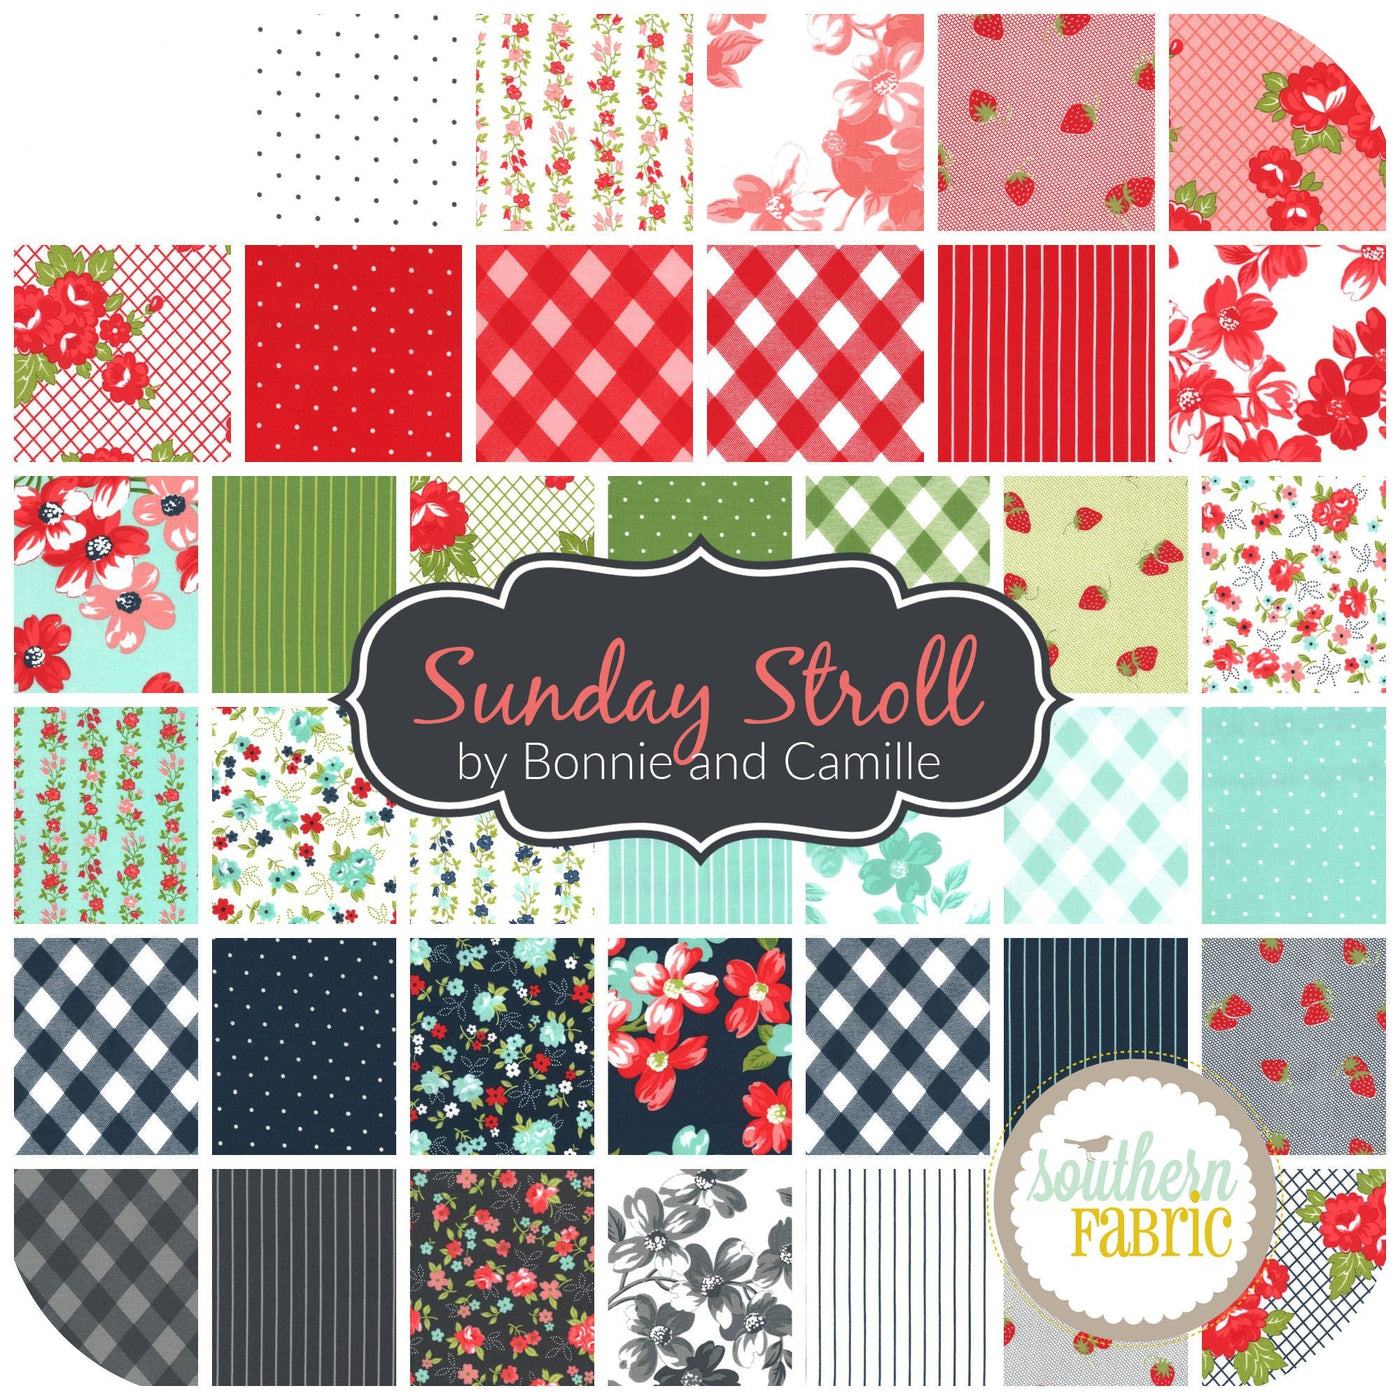 Sunday Stroll Charm Pack (42 pcs) by Bonnie and Camille for Moda